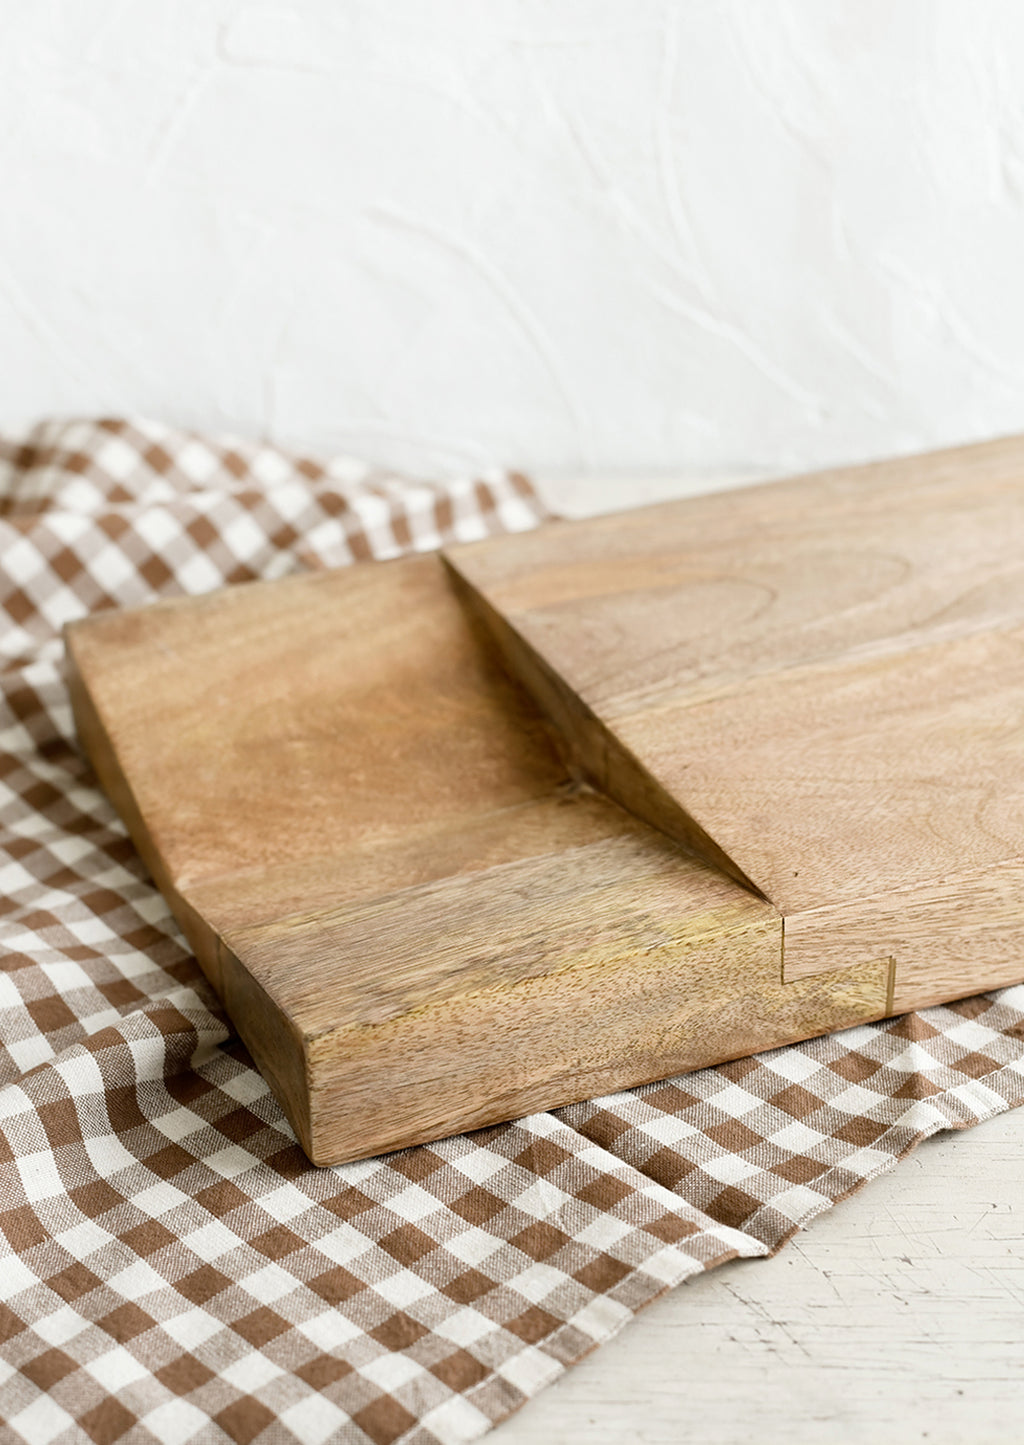 1: A thick mango wood chopping board with divoted section at 1/3.